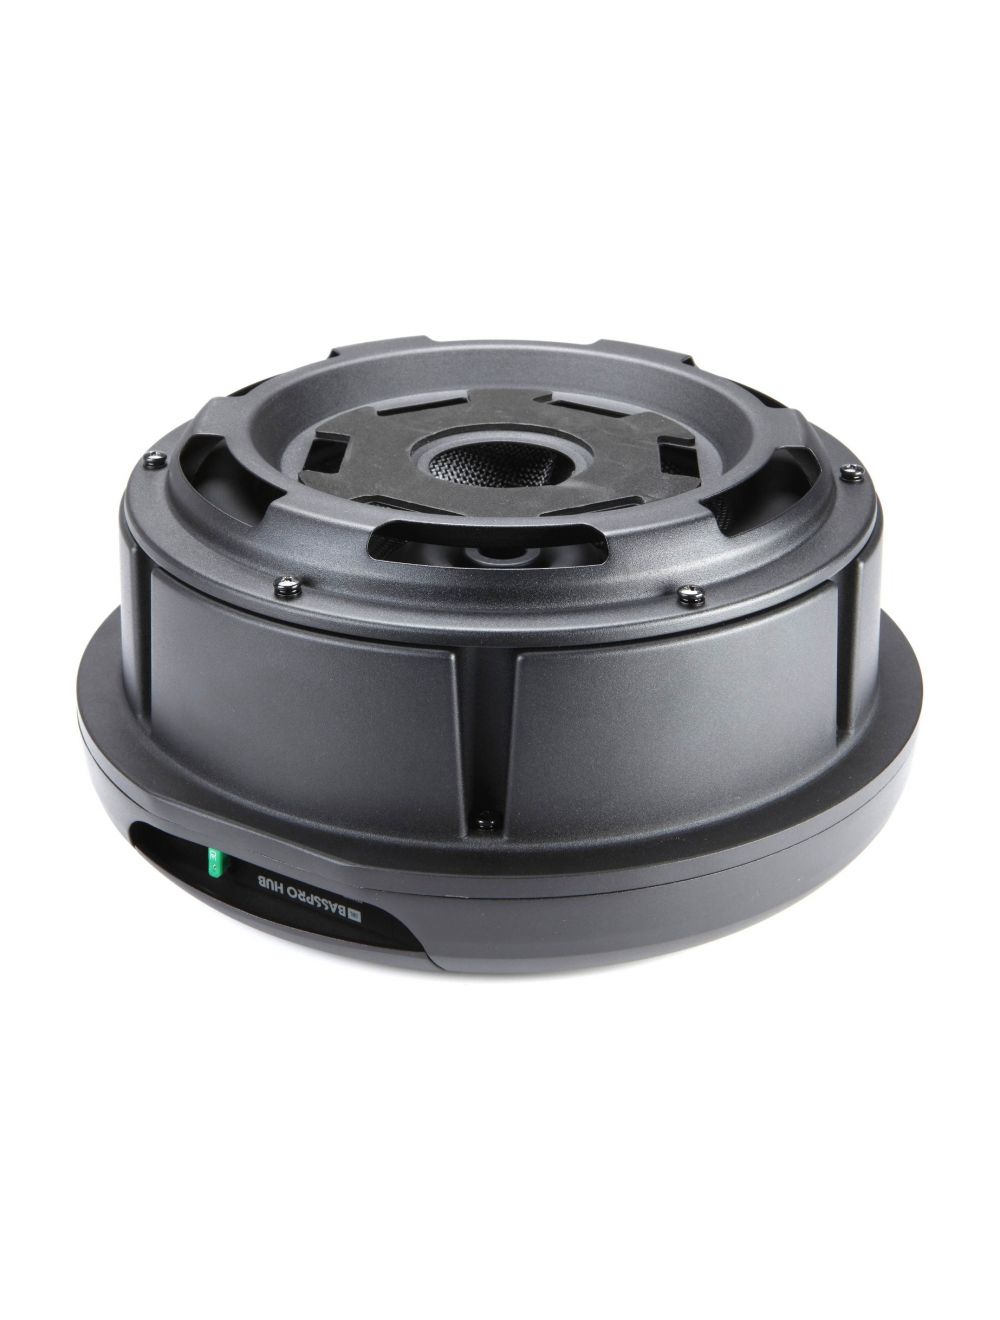 JBL BassPro Hub Powered 11" Car Subwoofer enclosure with 200-watt amp  mounts to hub of spare tire